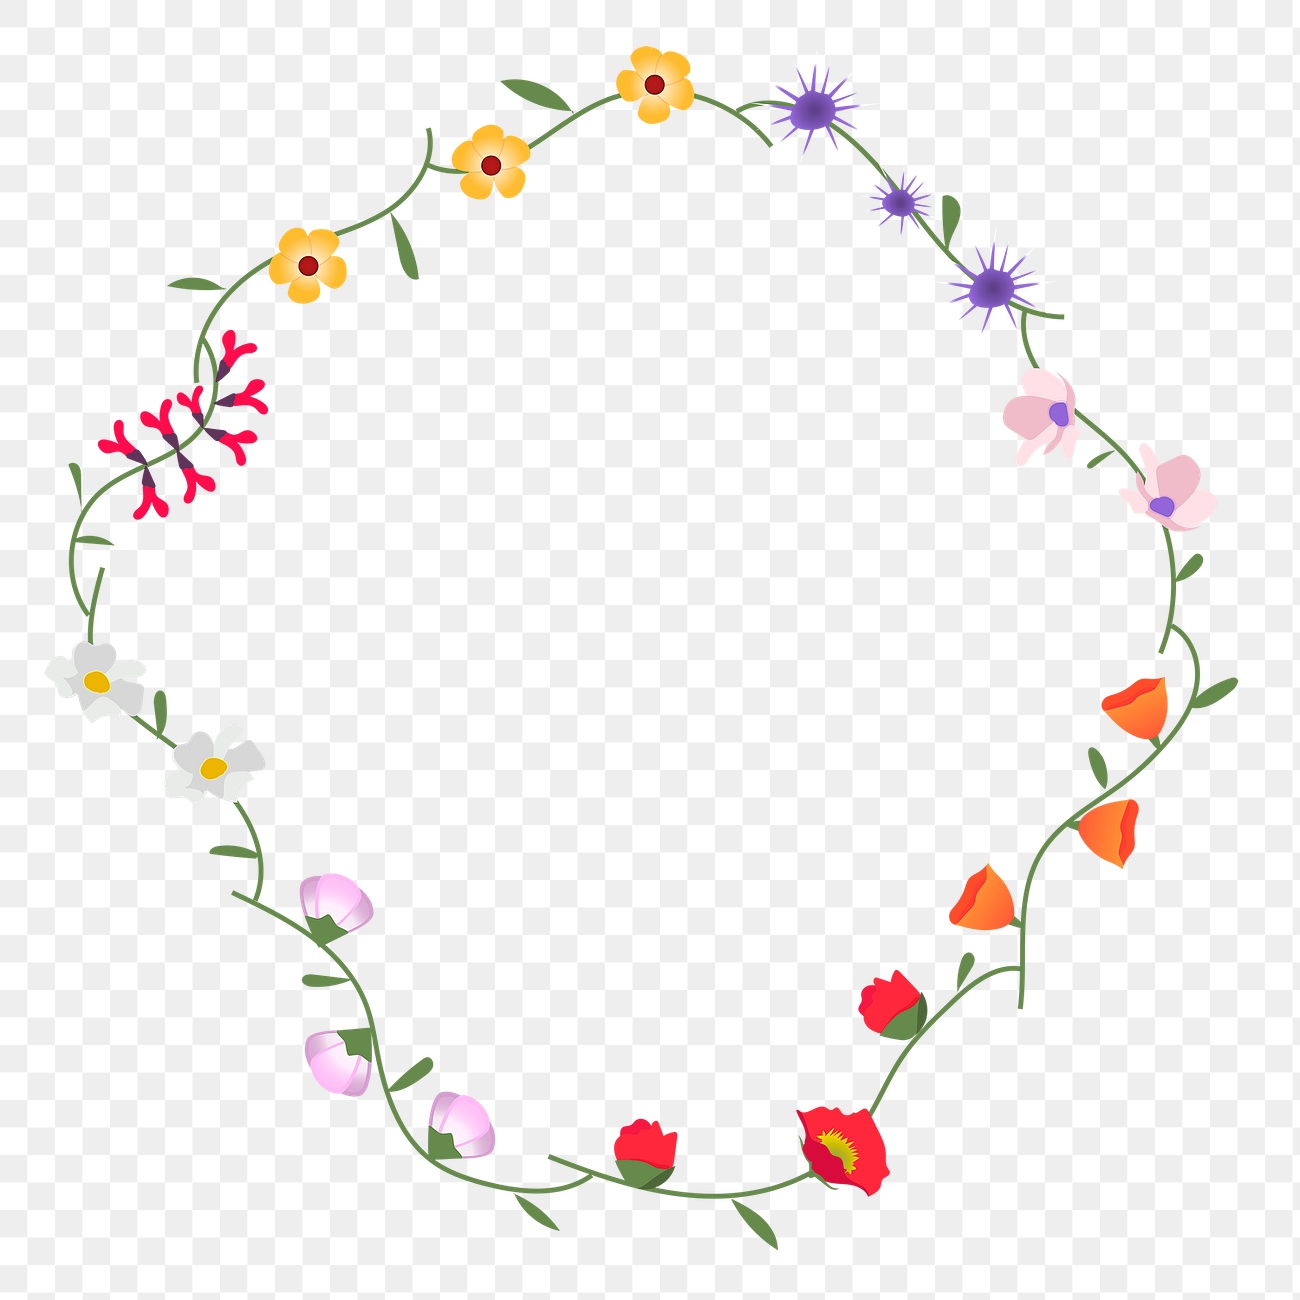 Png frame with wildflower border | Premium PNG - rawpixel